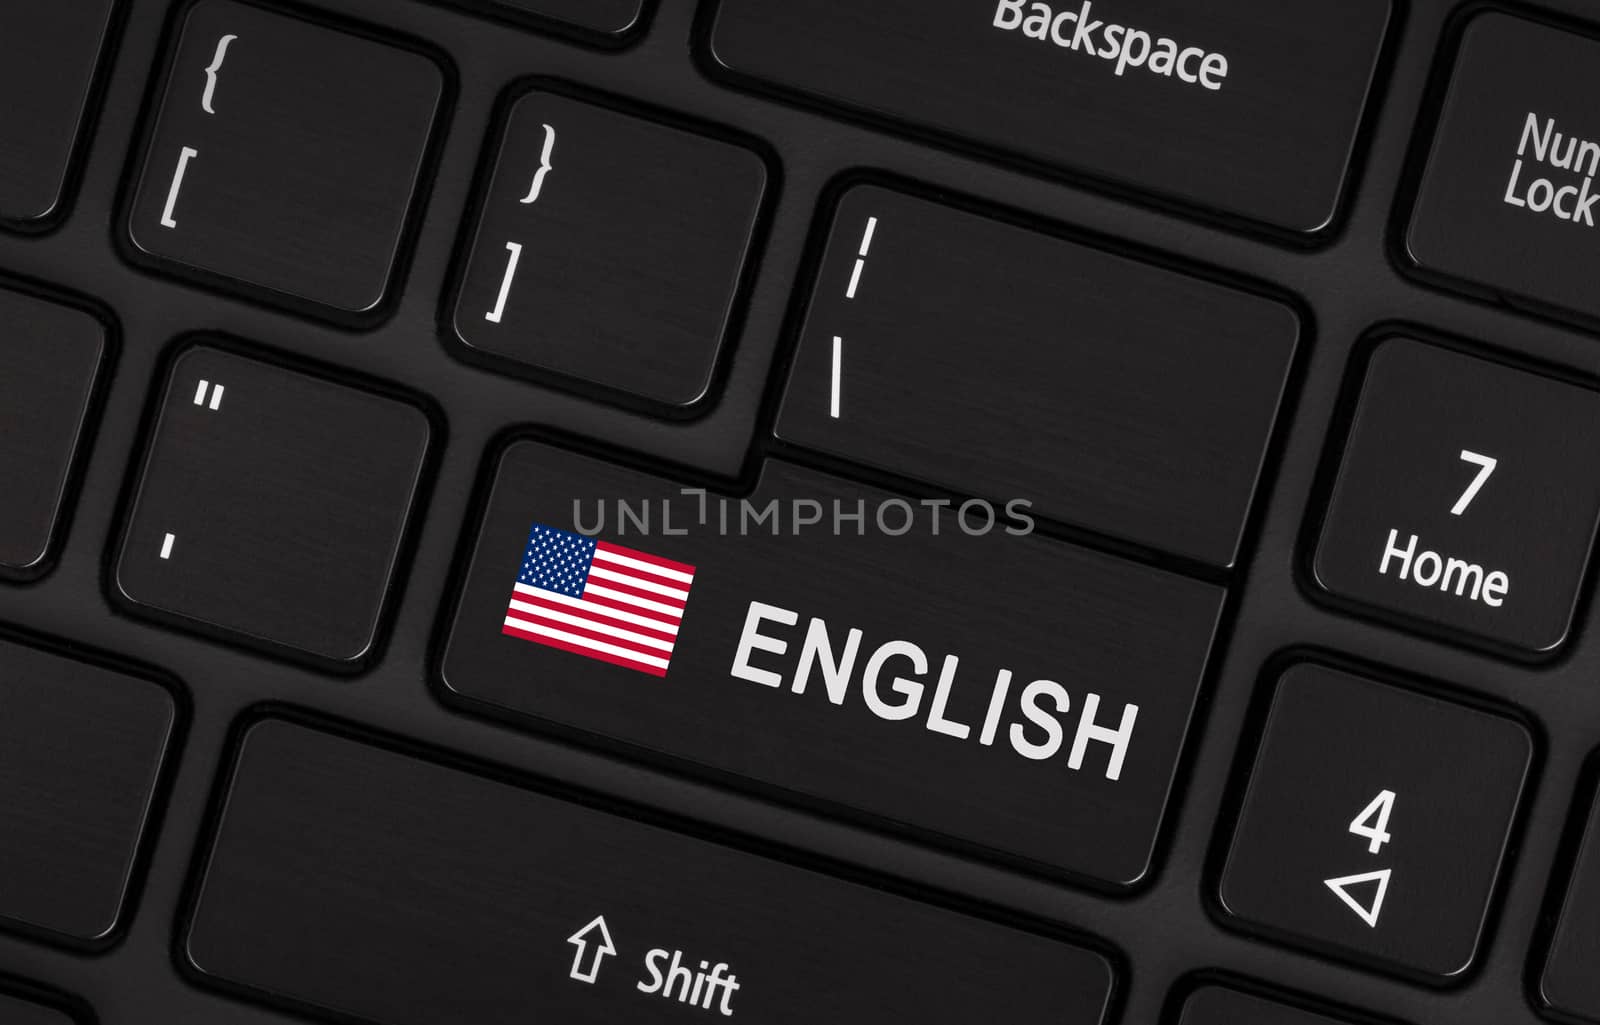 Enter button with flag USA - Concept of language (learning or translate)